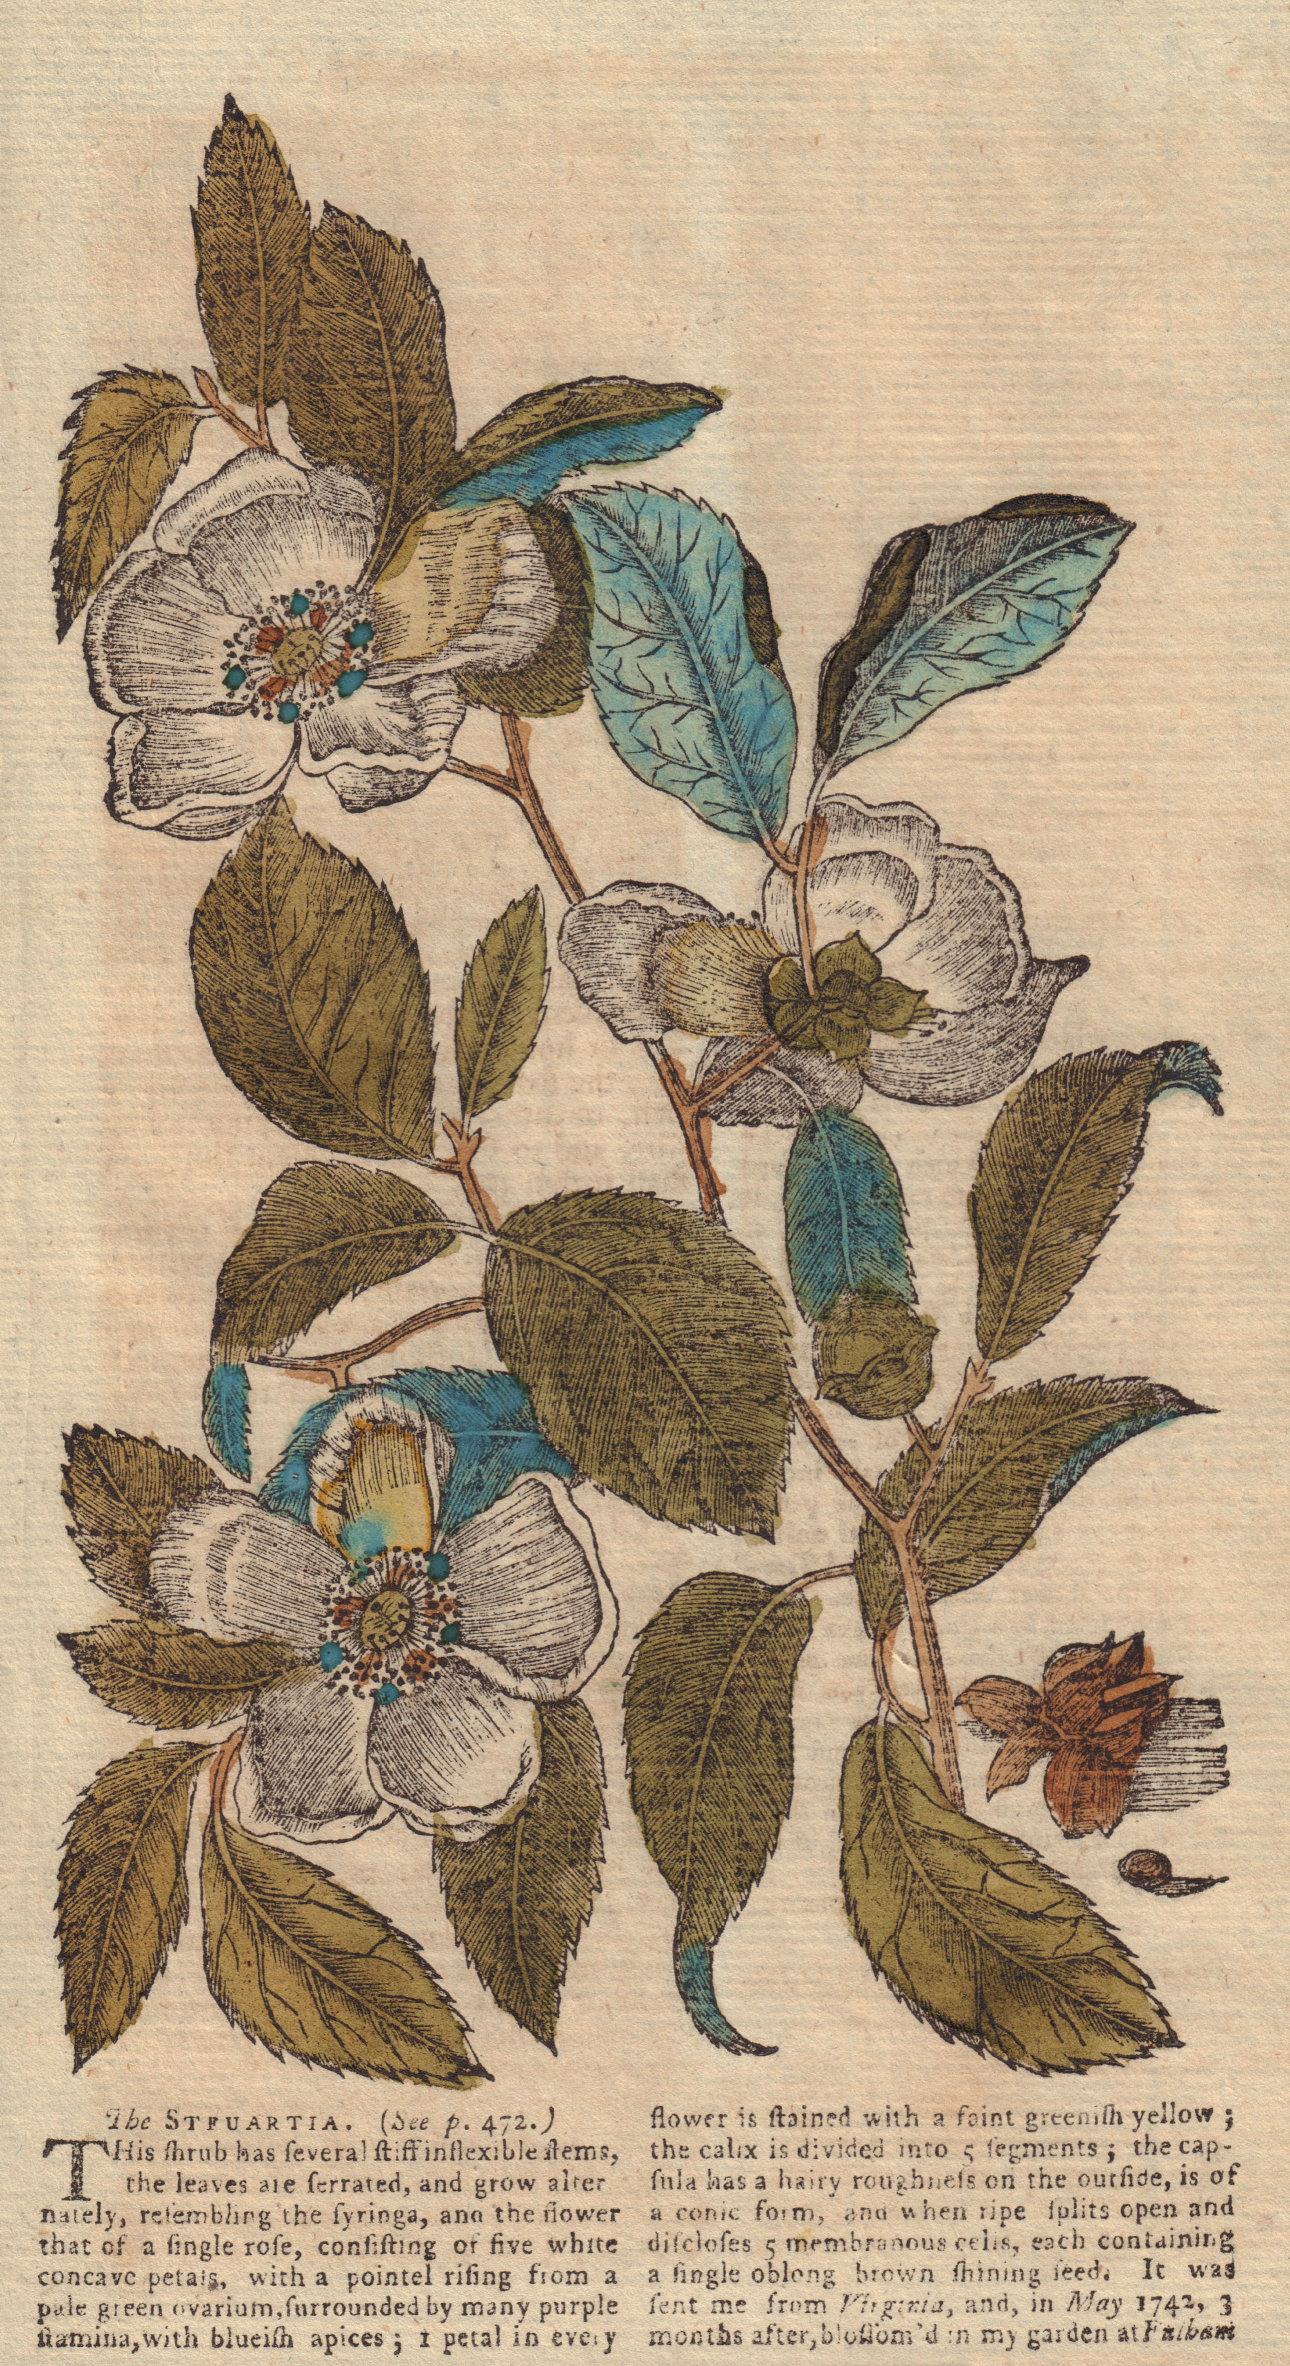 Associate Product The Shrub The Steuartia (Malachodendrum). Flowers. GENTS MAG 1753 old print